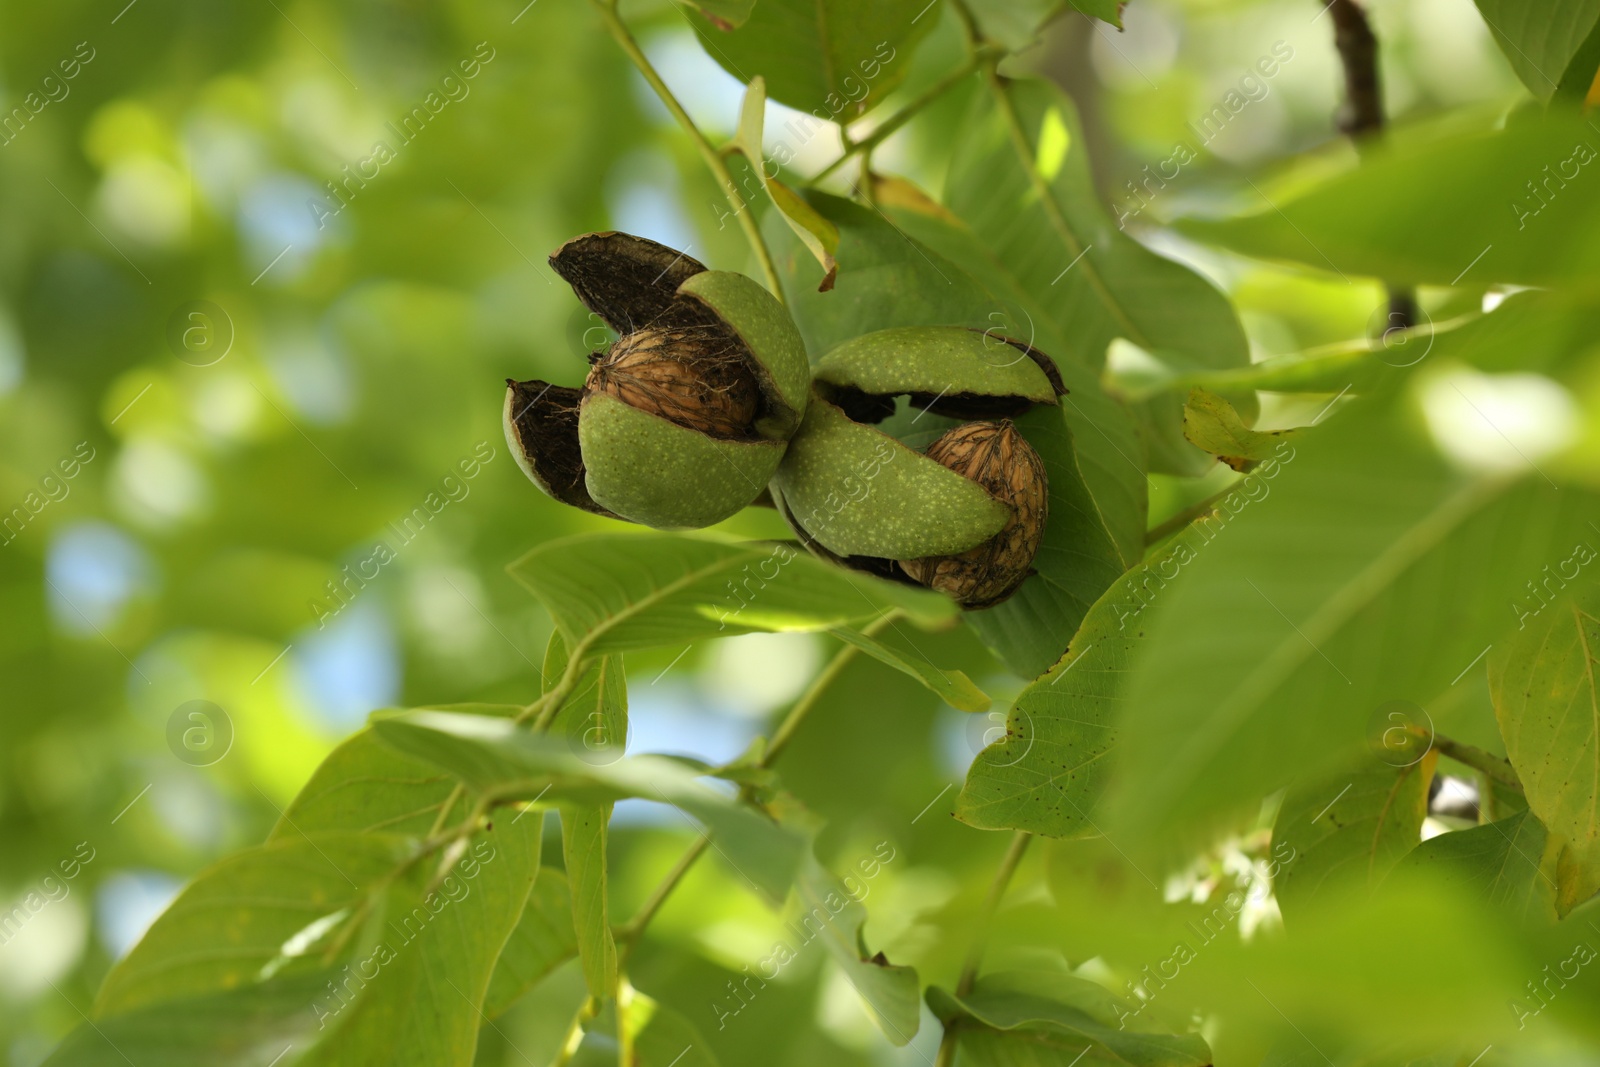 Photo of Ripe walnuts in husks growing on tree outdoors, closeup view